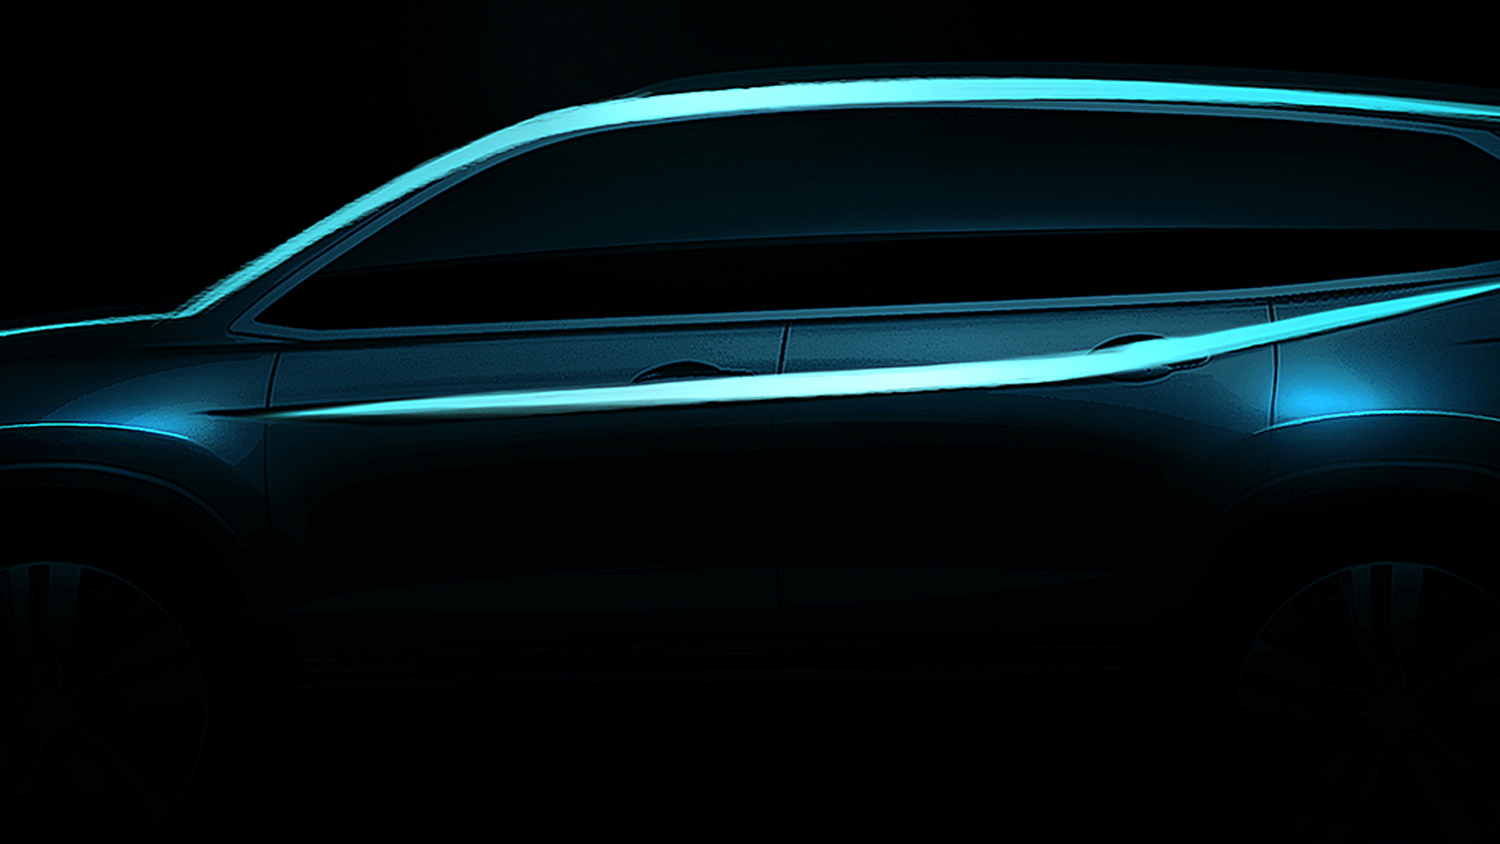 All-New 2016 Honda Pilot SUV to Make Global Debut at 2015 Chicago Auto Show